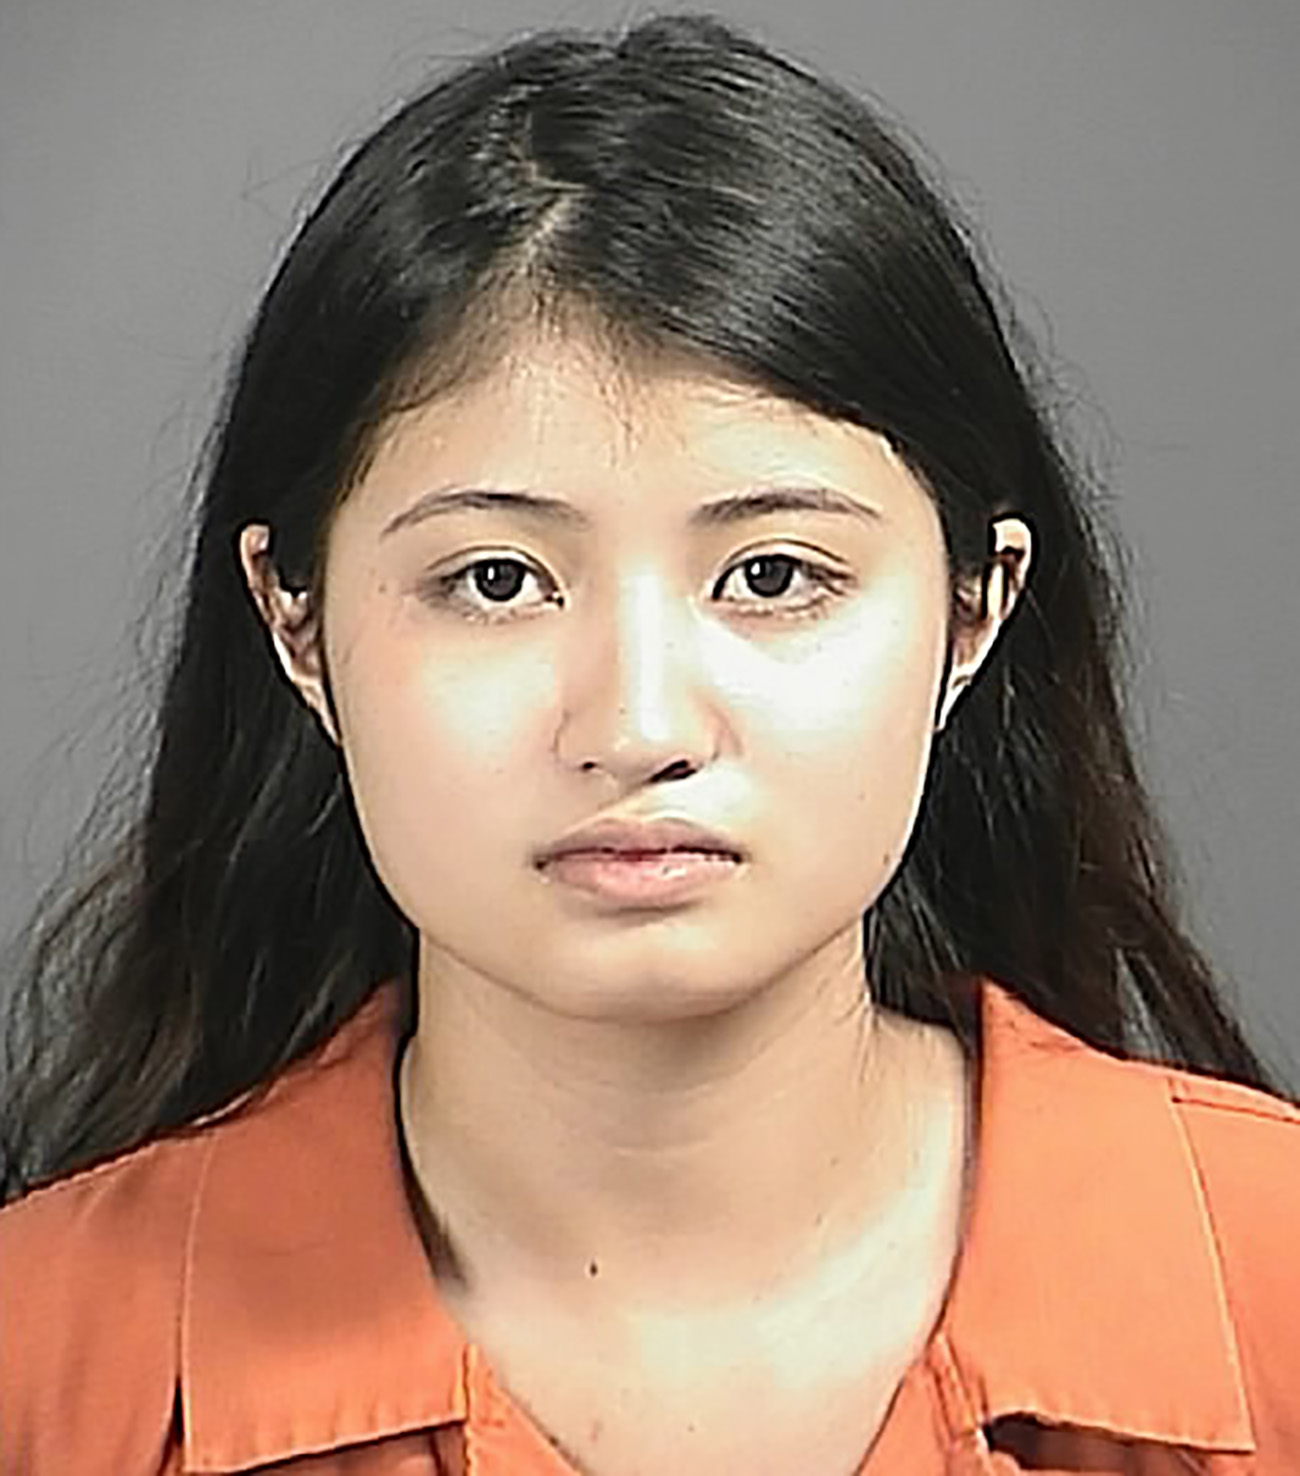 Isabella Guzman was arrested in August 2013 after police said she brutally stabbed her mother to death in Aurora.